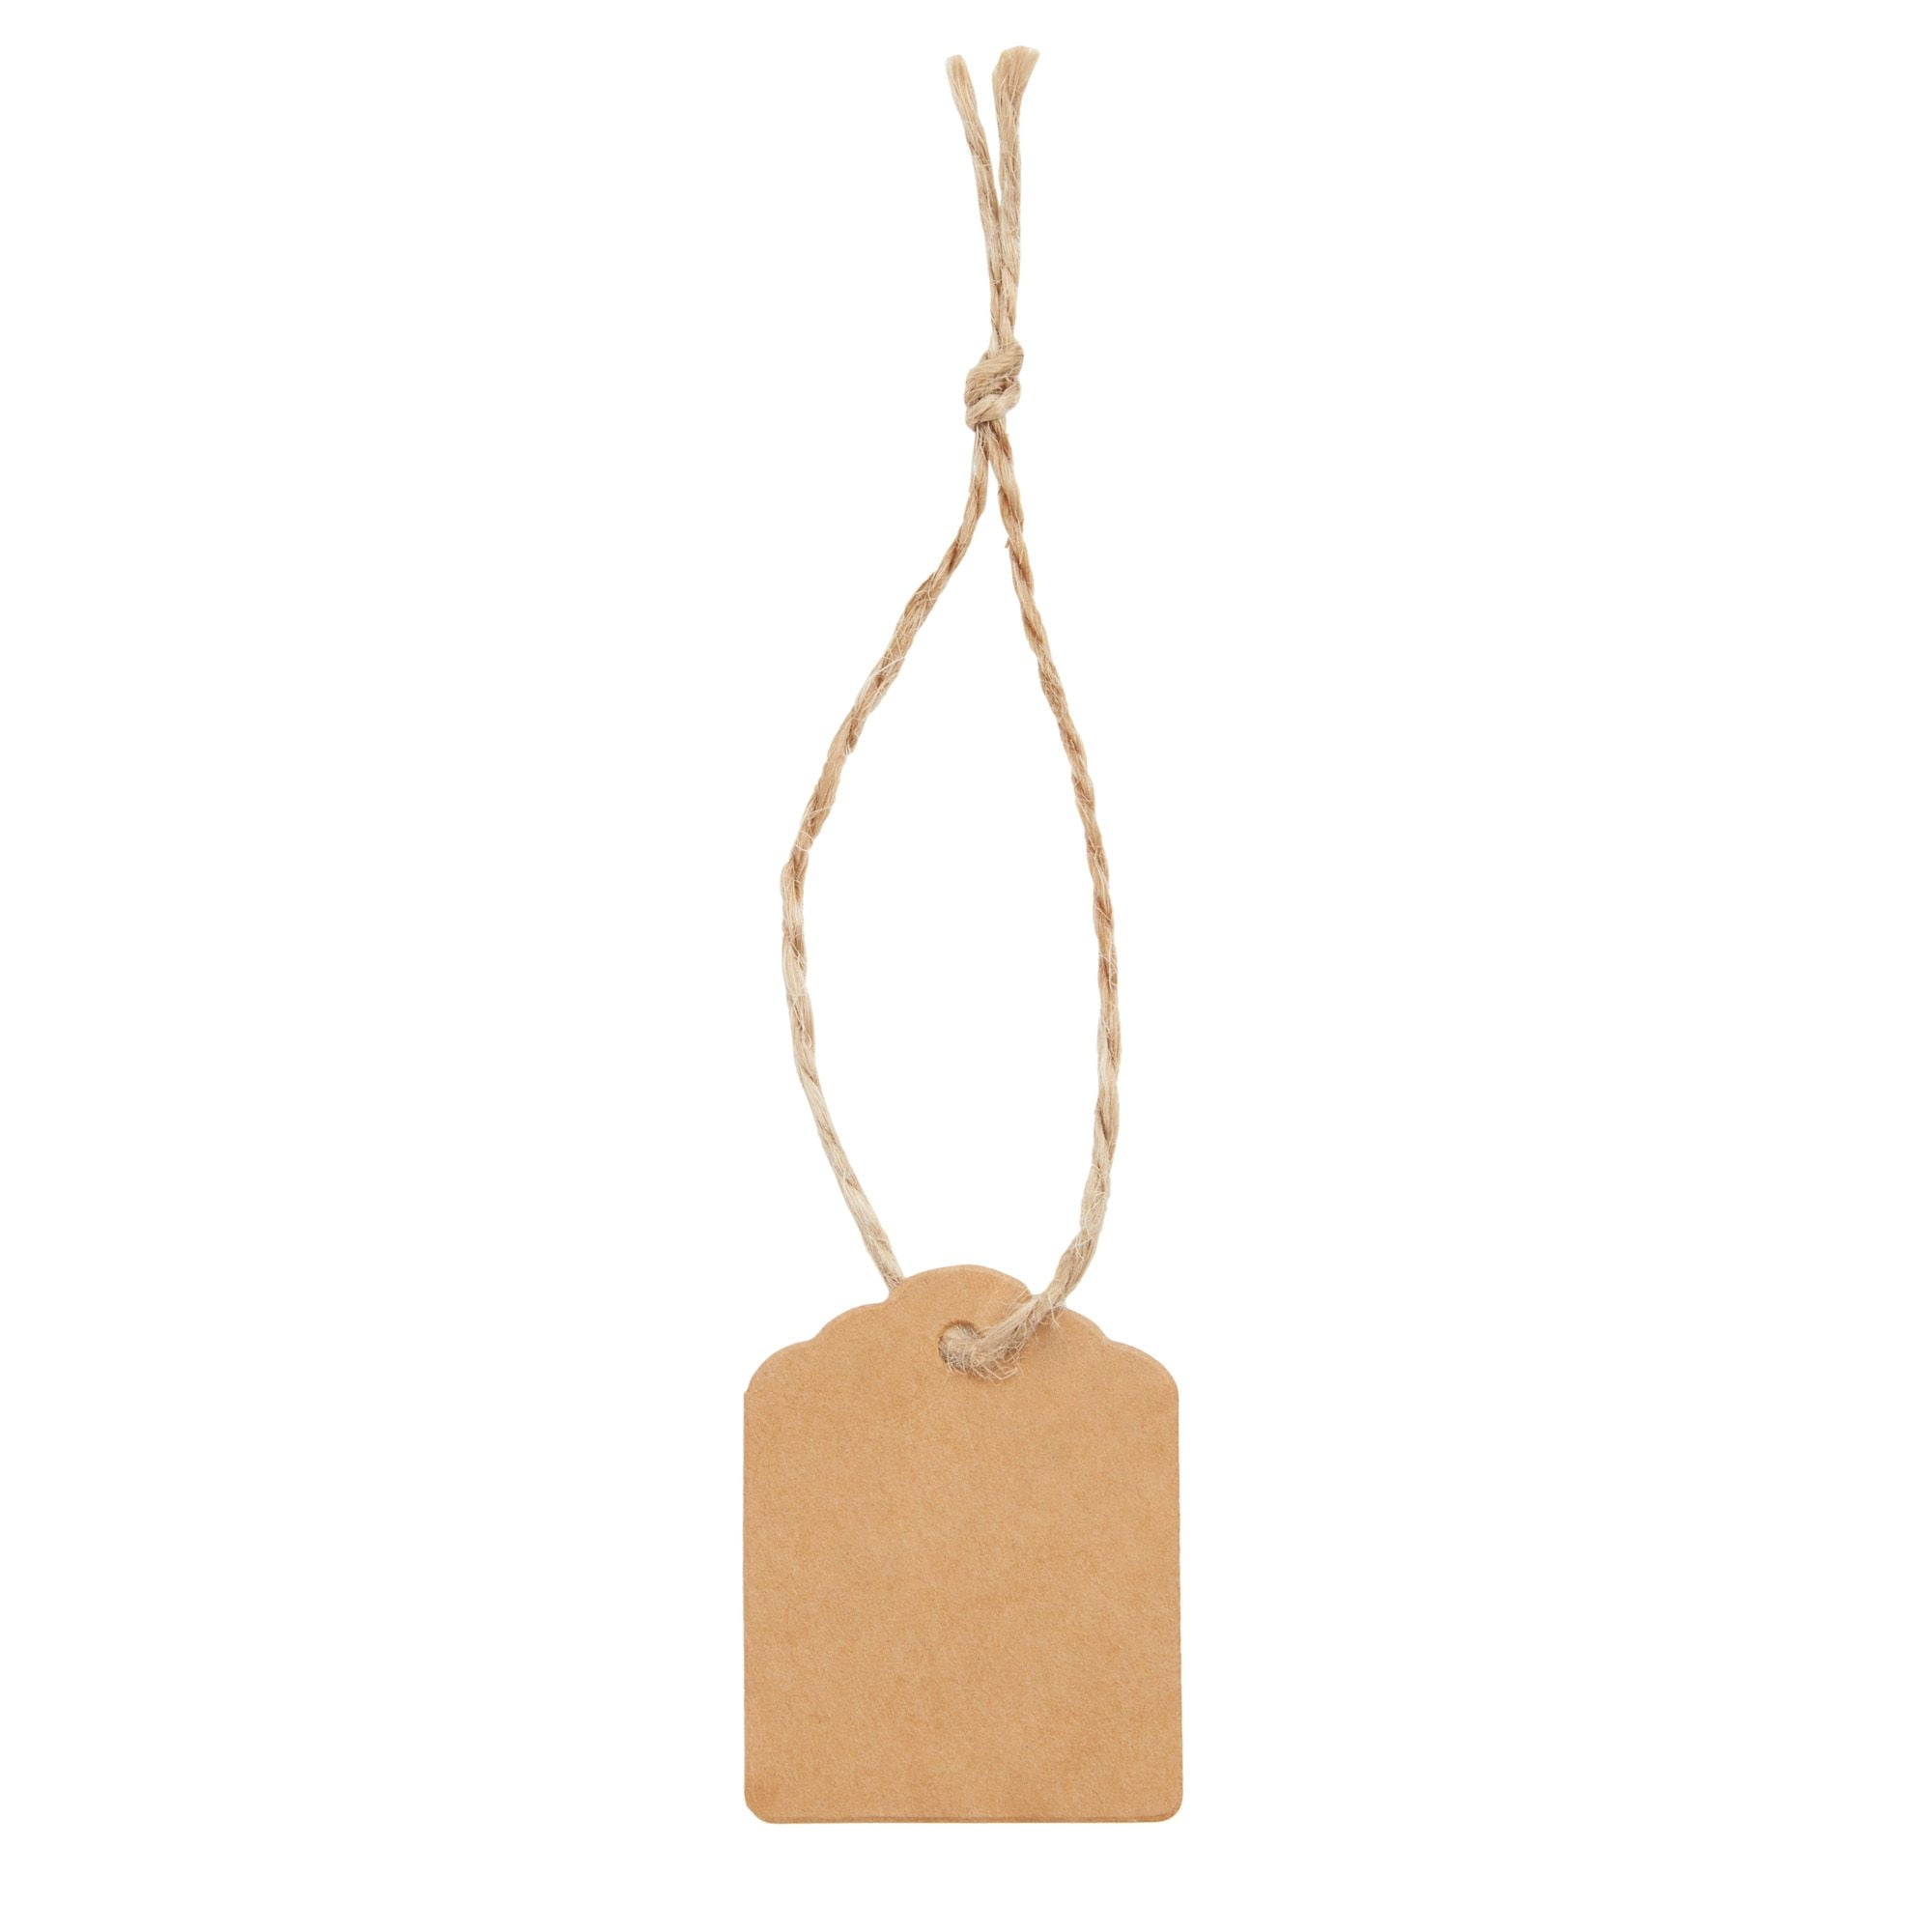 1¾ in. x 1-1/8 in. Recycled Kraft Merchandise Tags (with strings